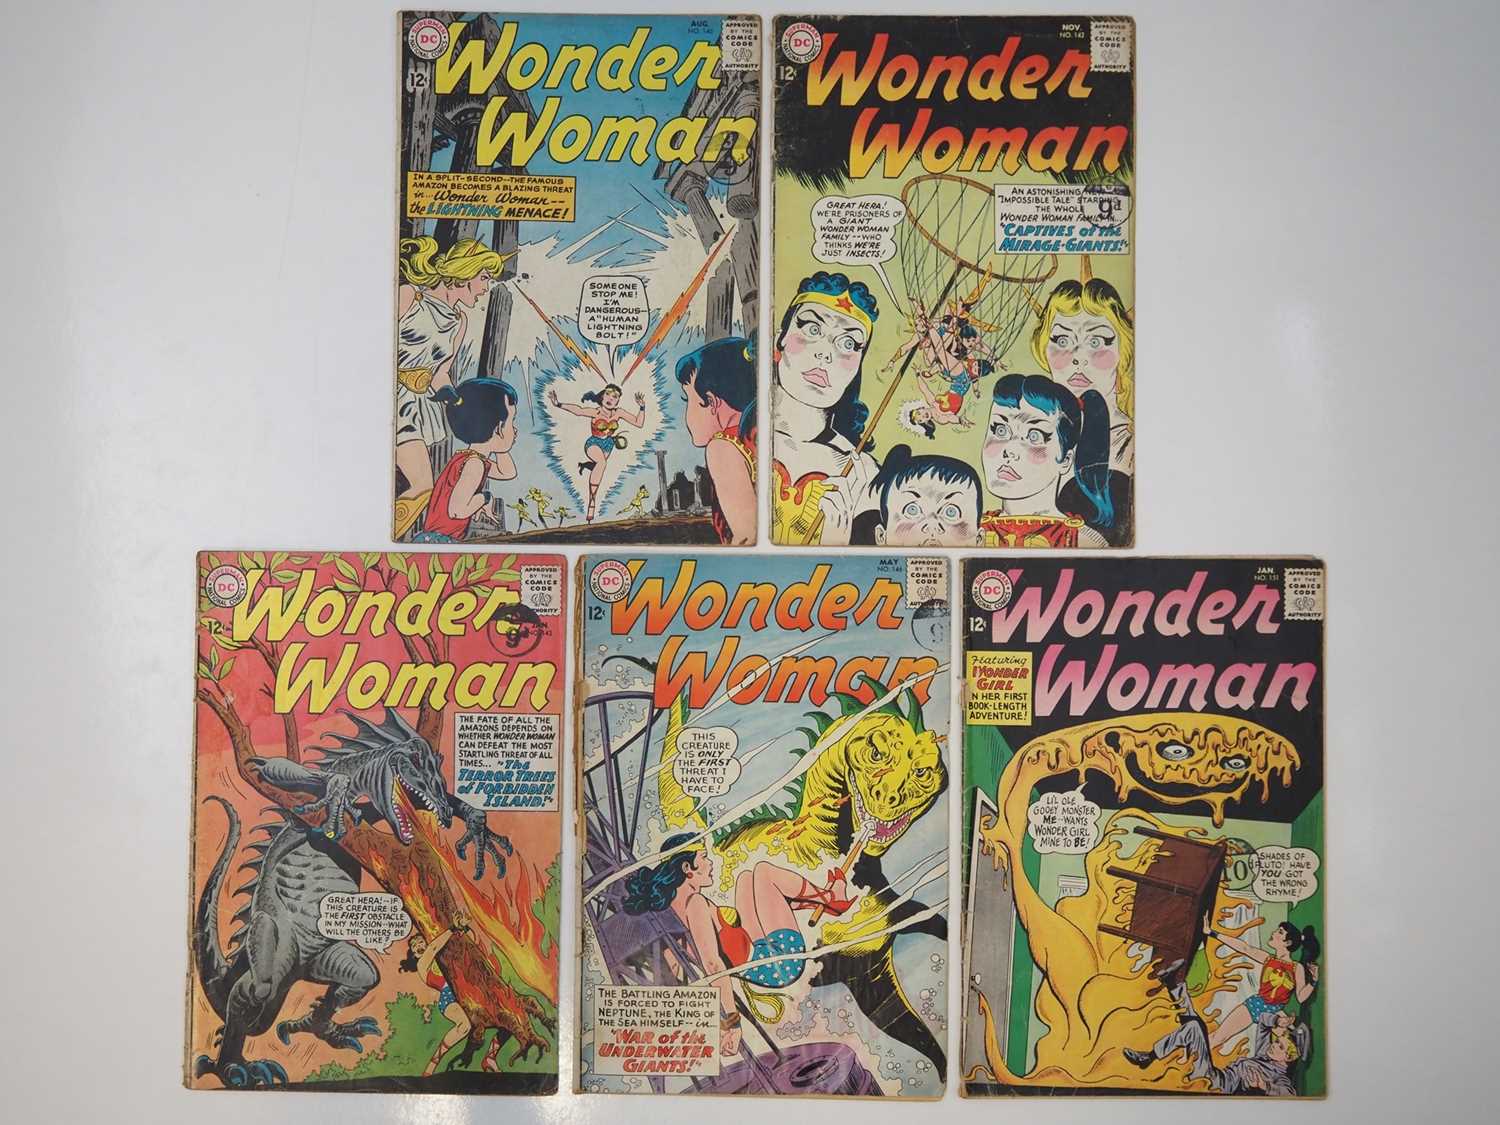 WONDER WOMAN #140, 142, 143, 146, 151 (5 in Lot) - (1963/1965 - DC) - Includes the first solo